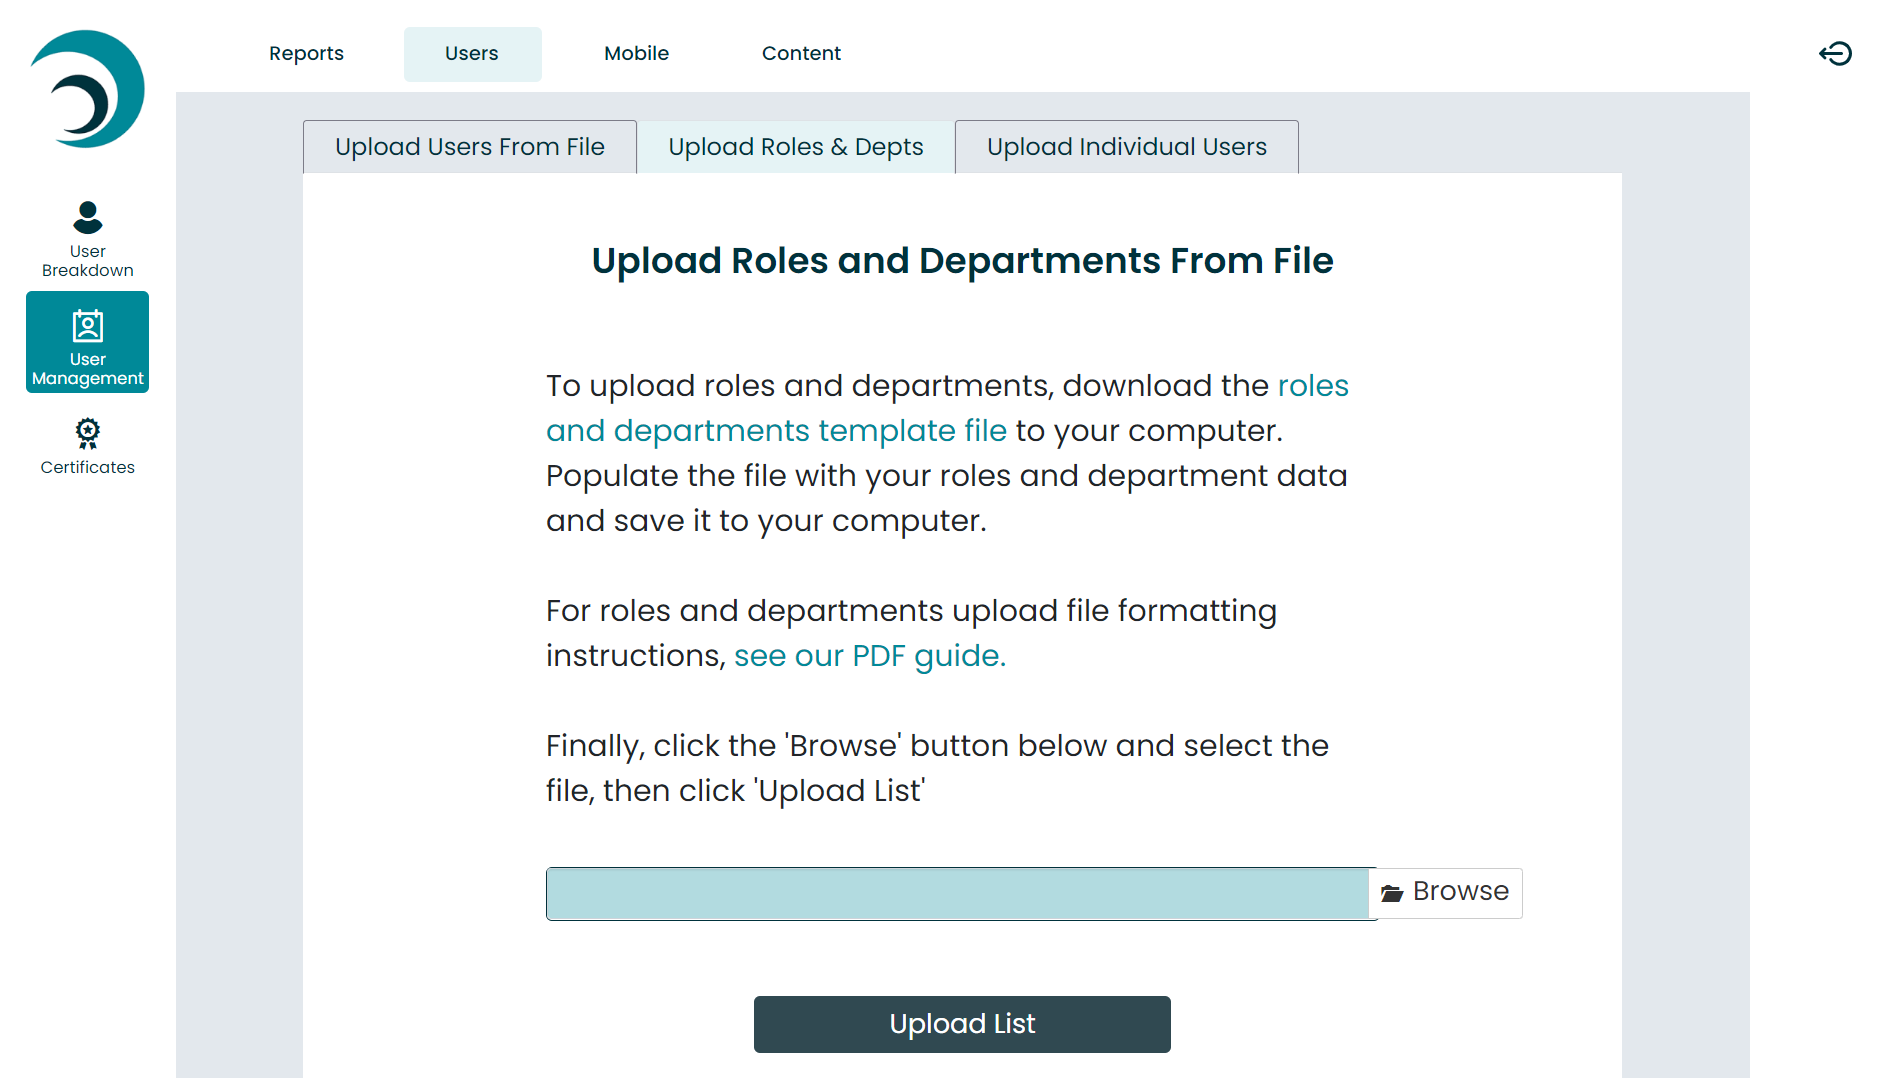 Upload roles and departments from file